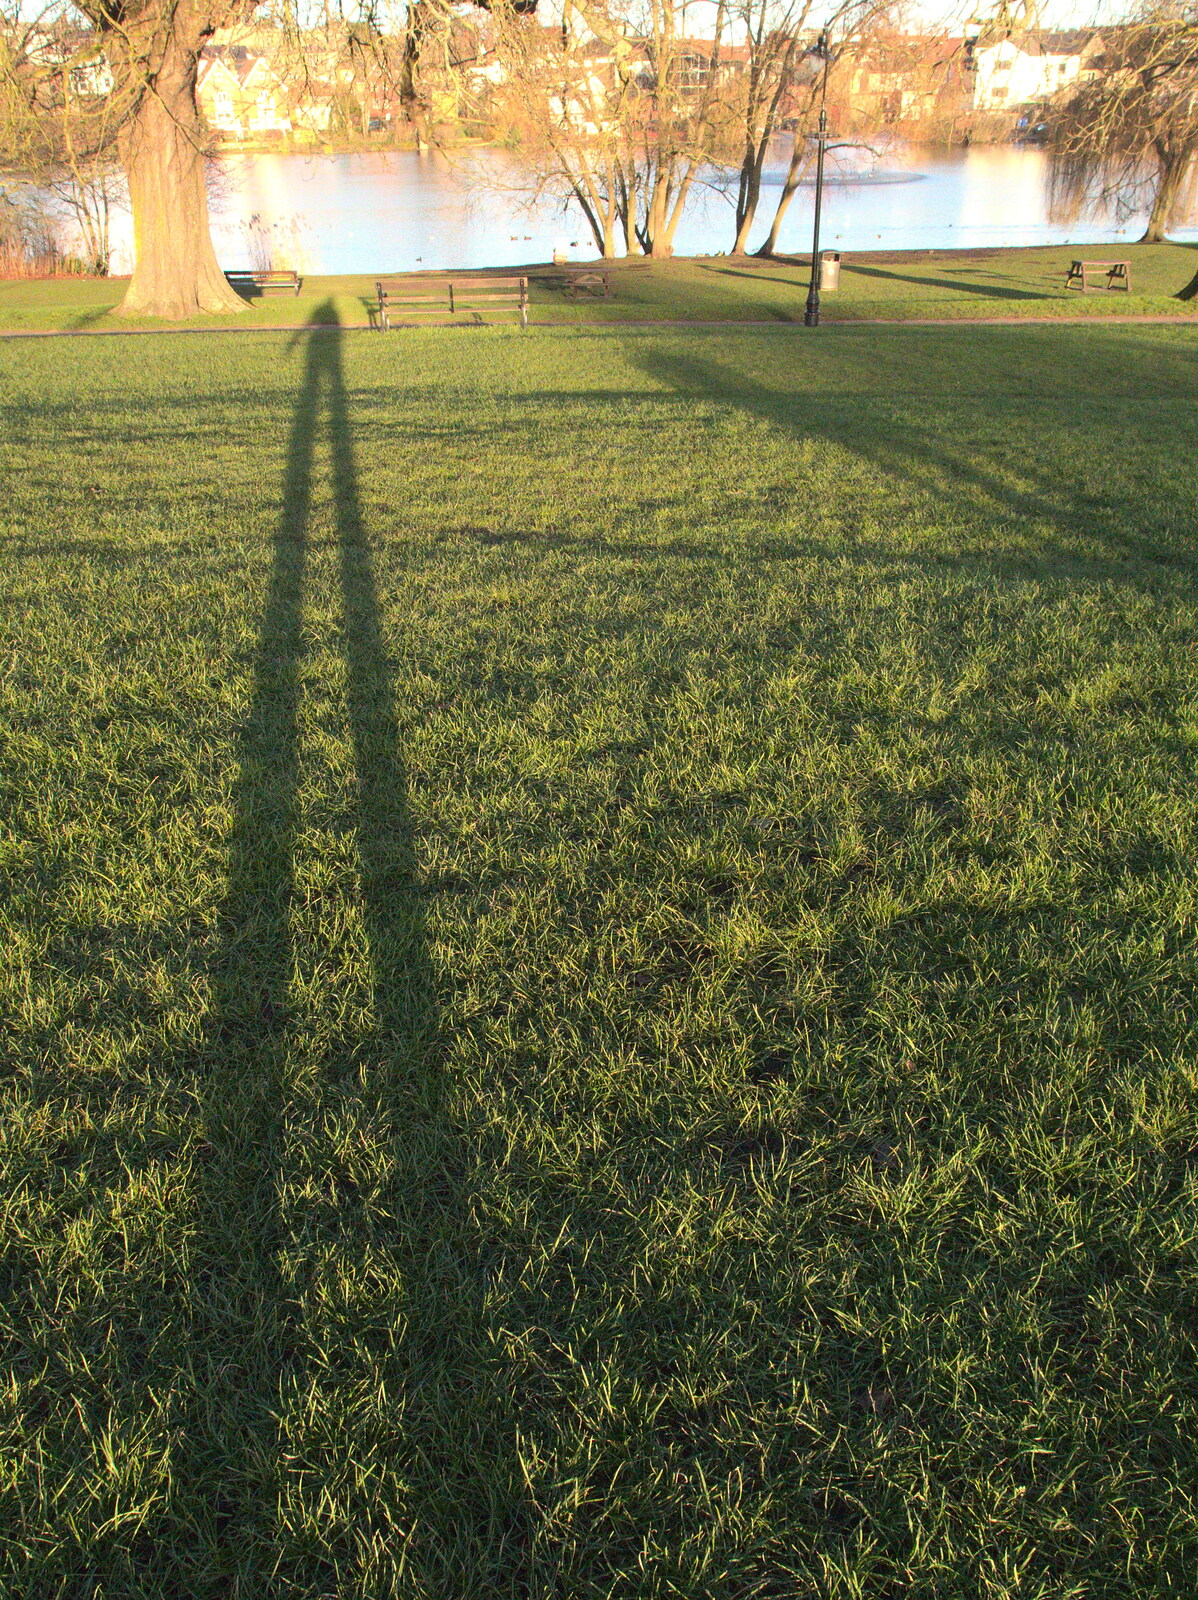 Nosher casts a very long shadow from Ten-Pin Bowling, Riverside, Norwich - 3rd January 2016